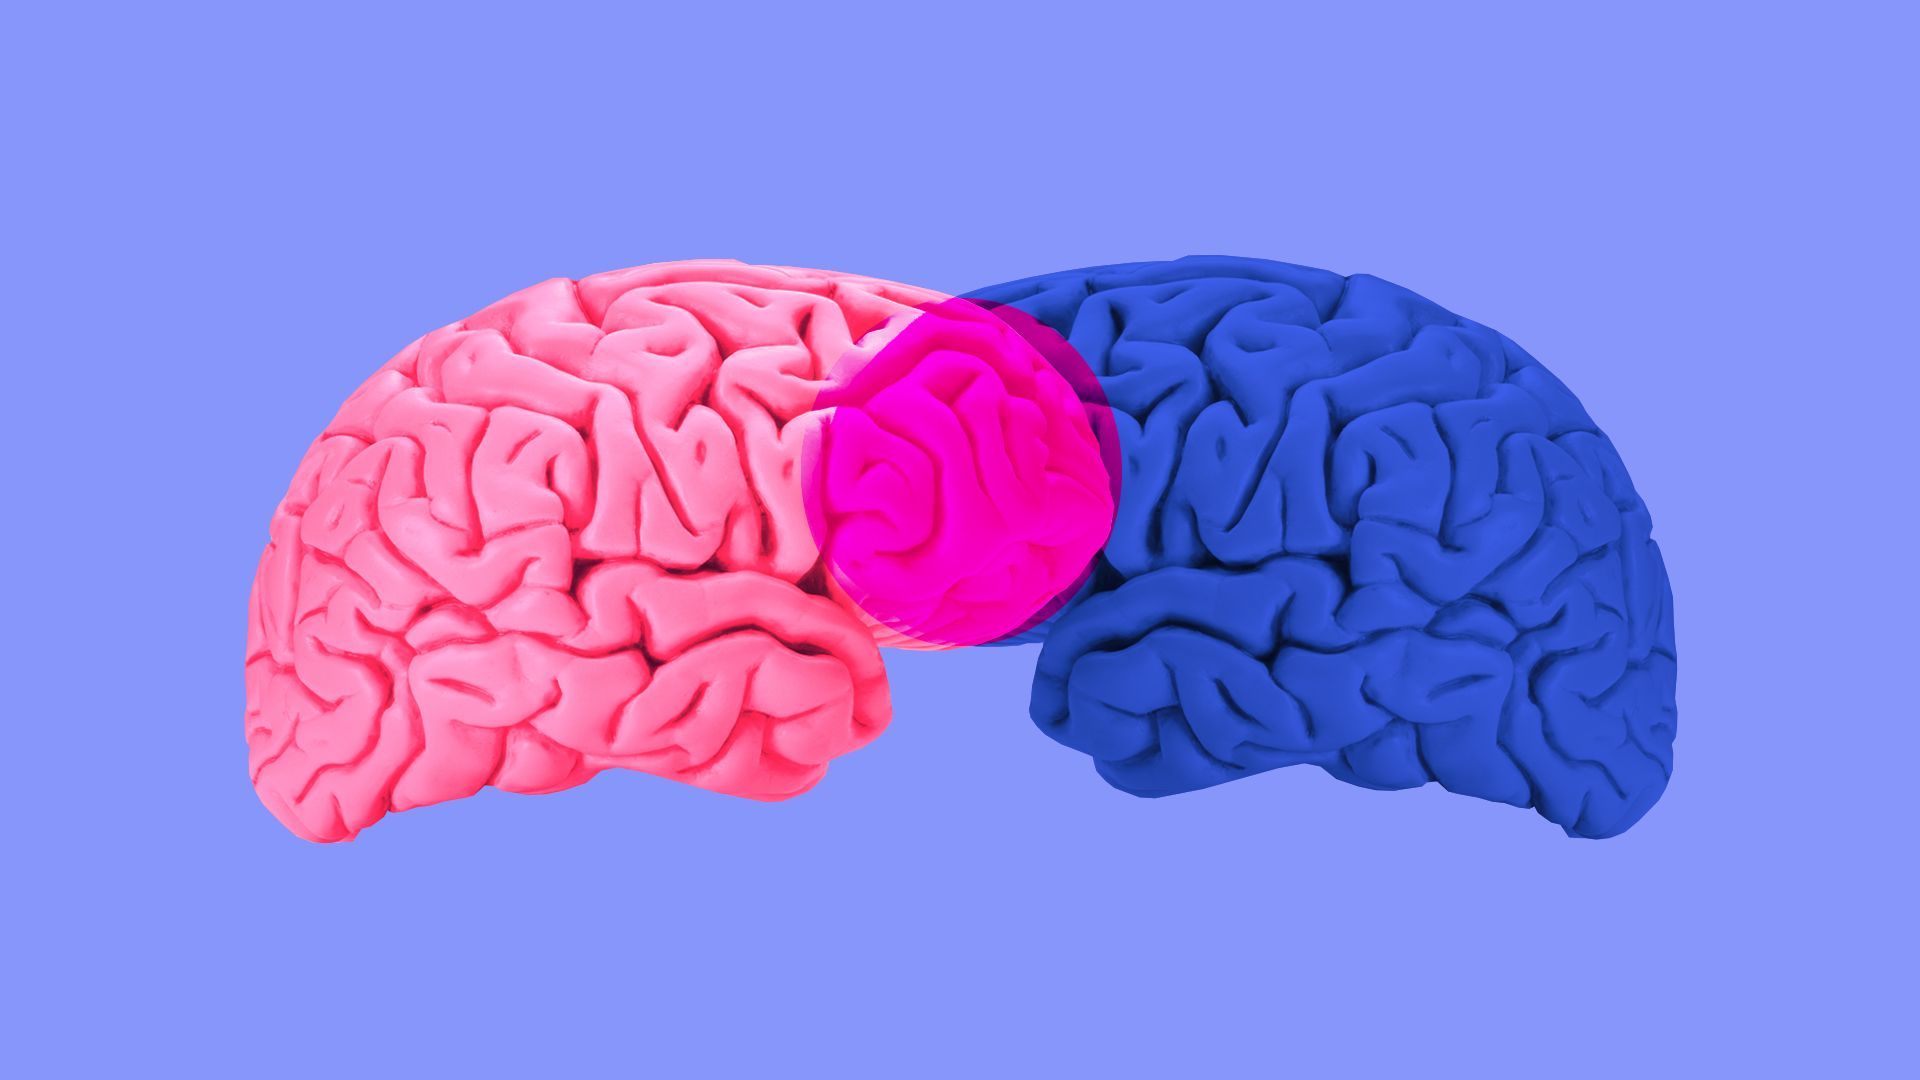 Illustration of two brains overlapping to form a Venn diagram